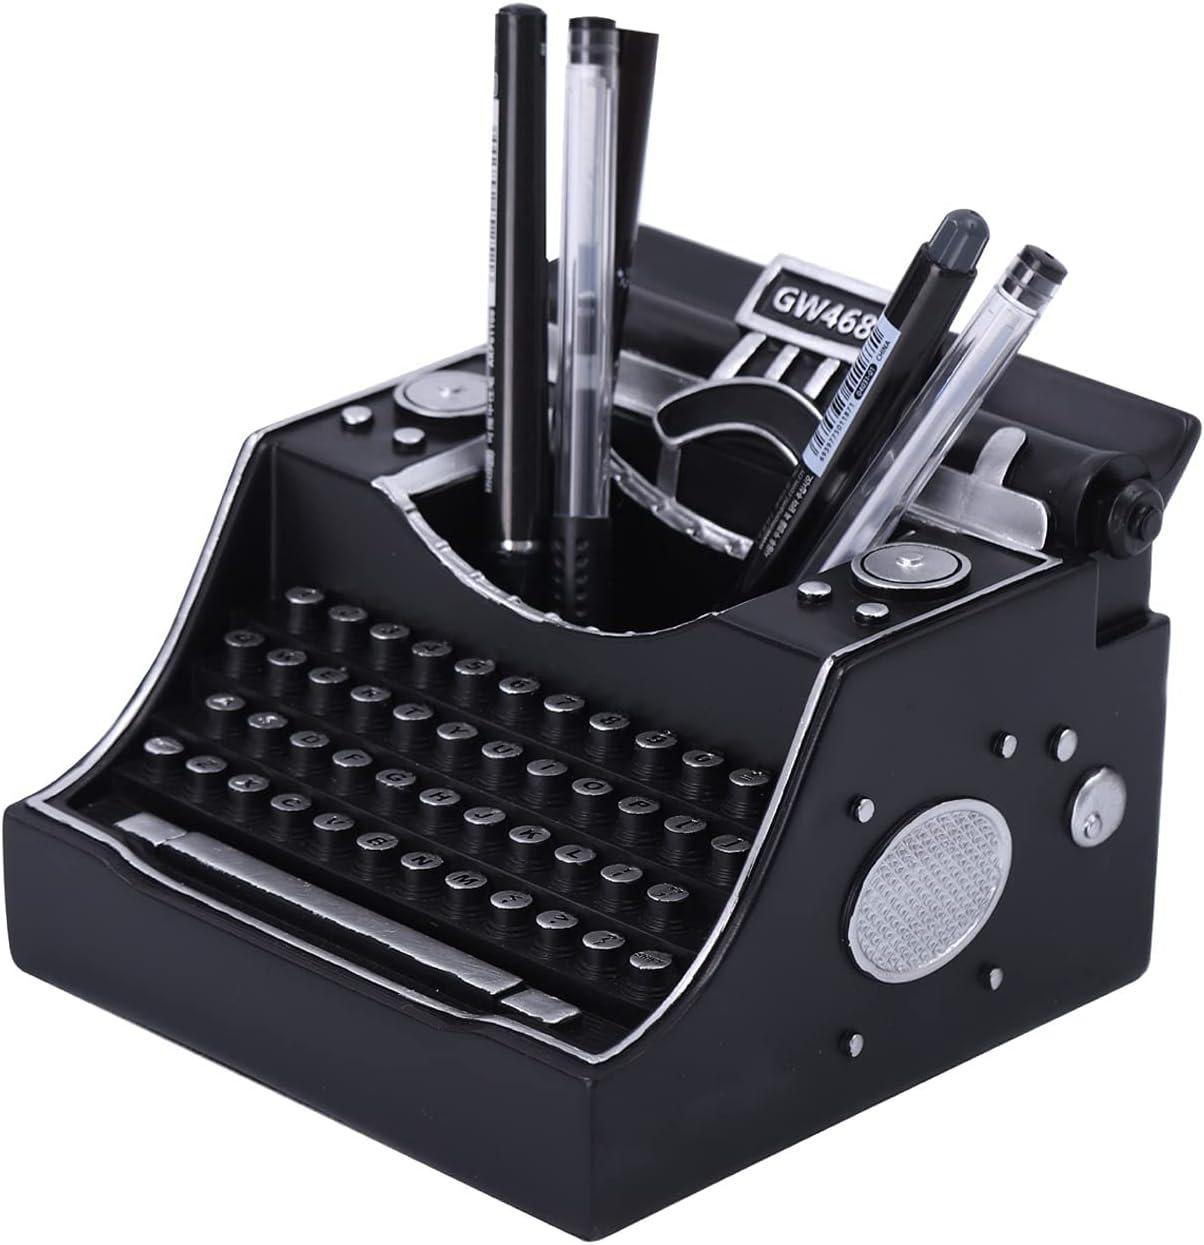 NCQIXIAO Vintage Typewriter Pencil Holder For Desk, Creative Pen Holder Organizer Cup For Office, School And Home (Black)